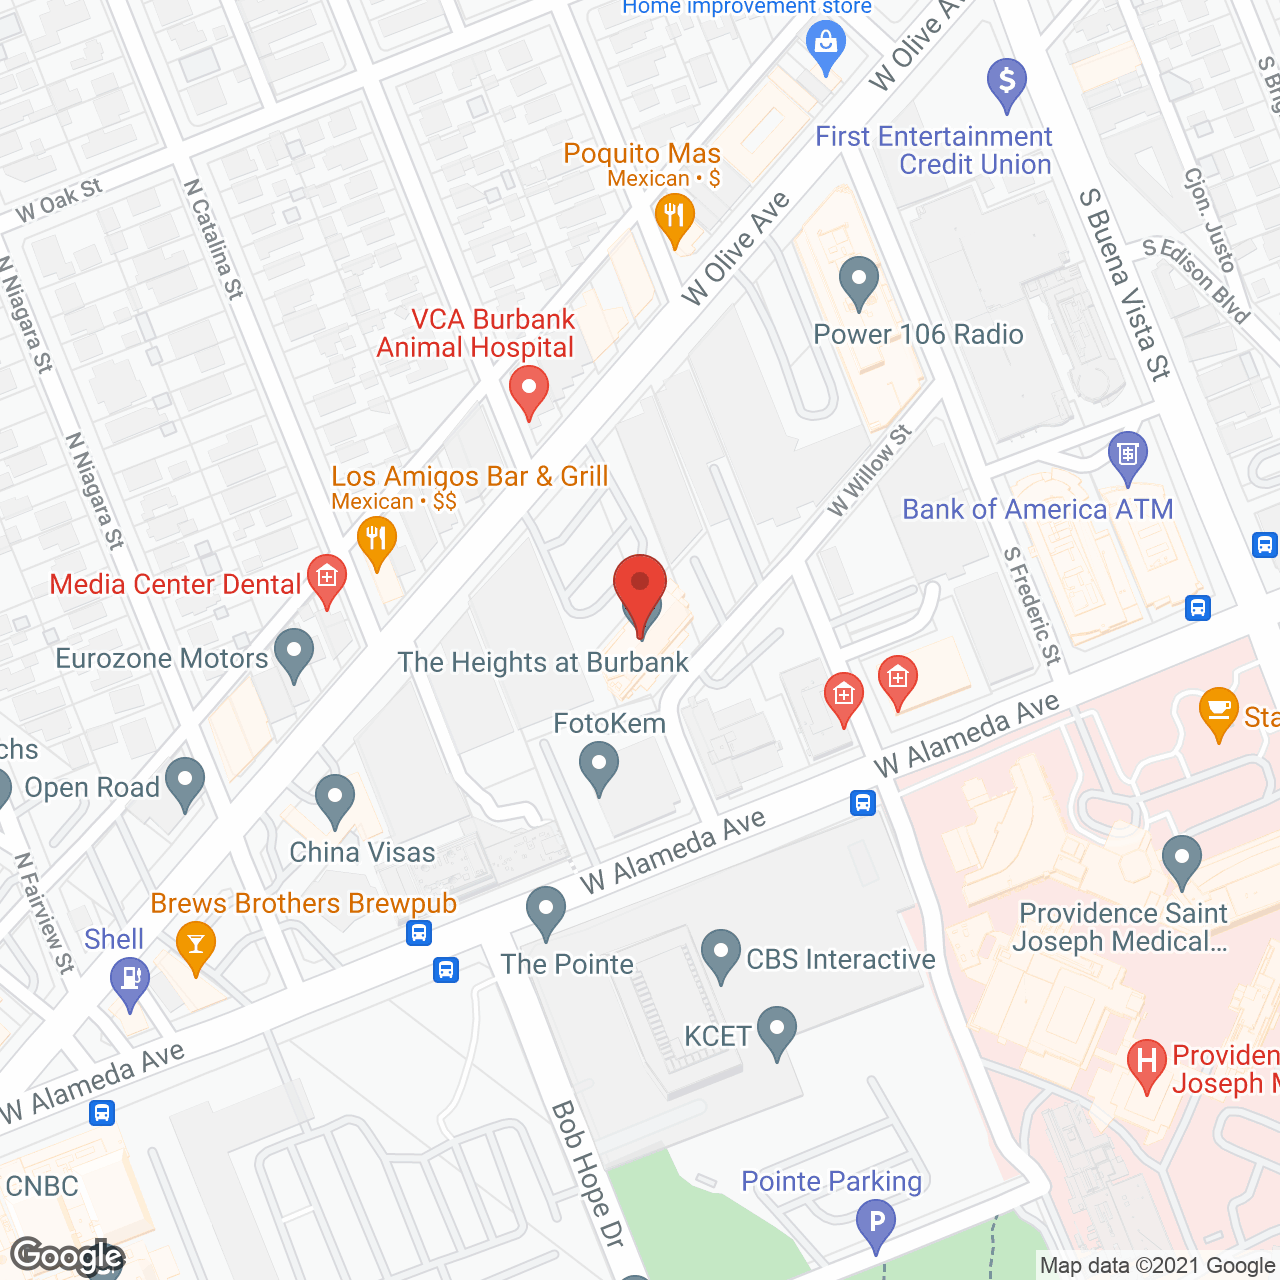 Ivy Park at Burbank in google map